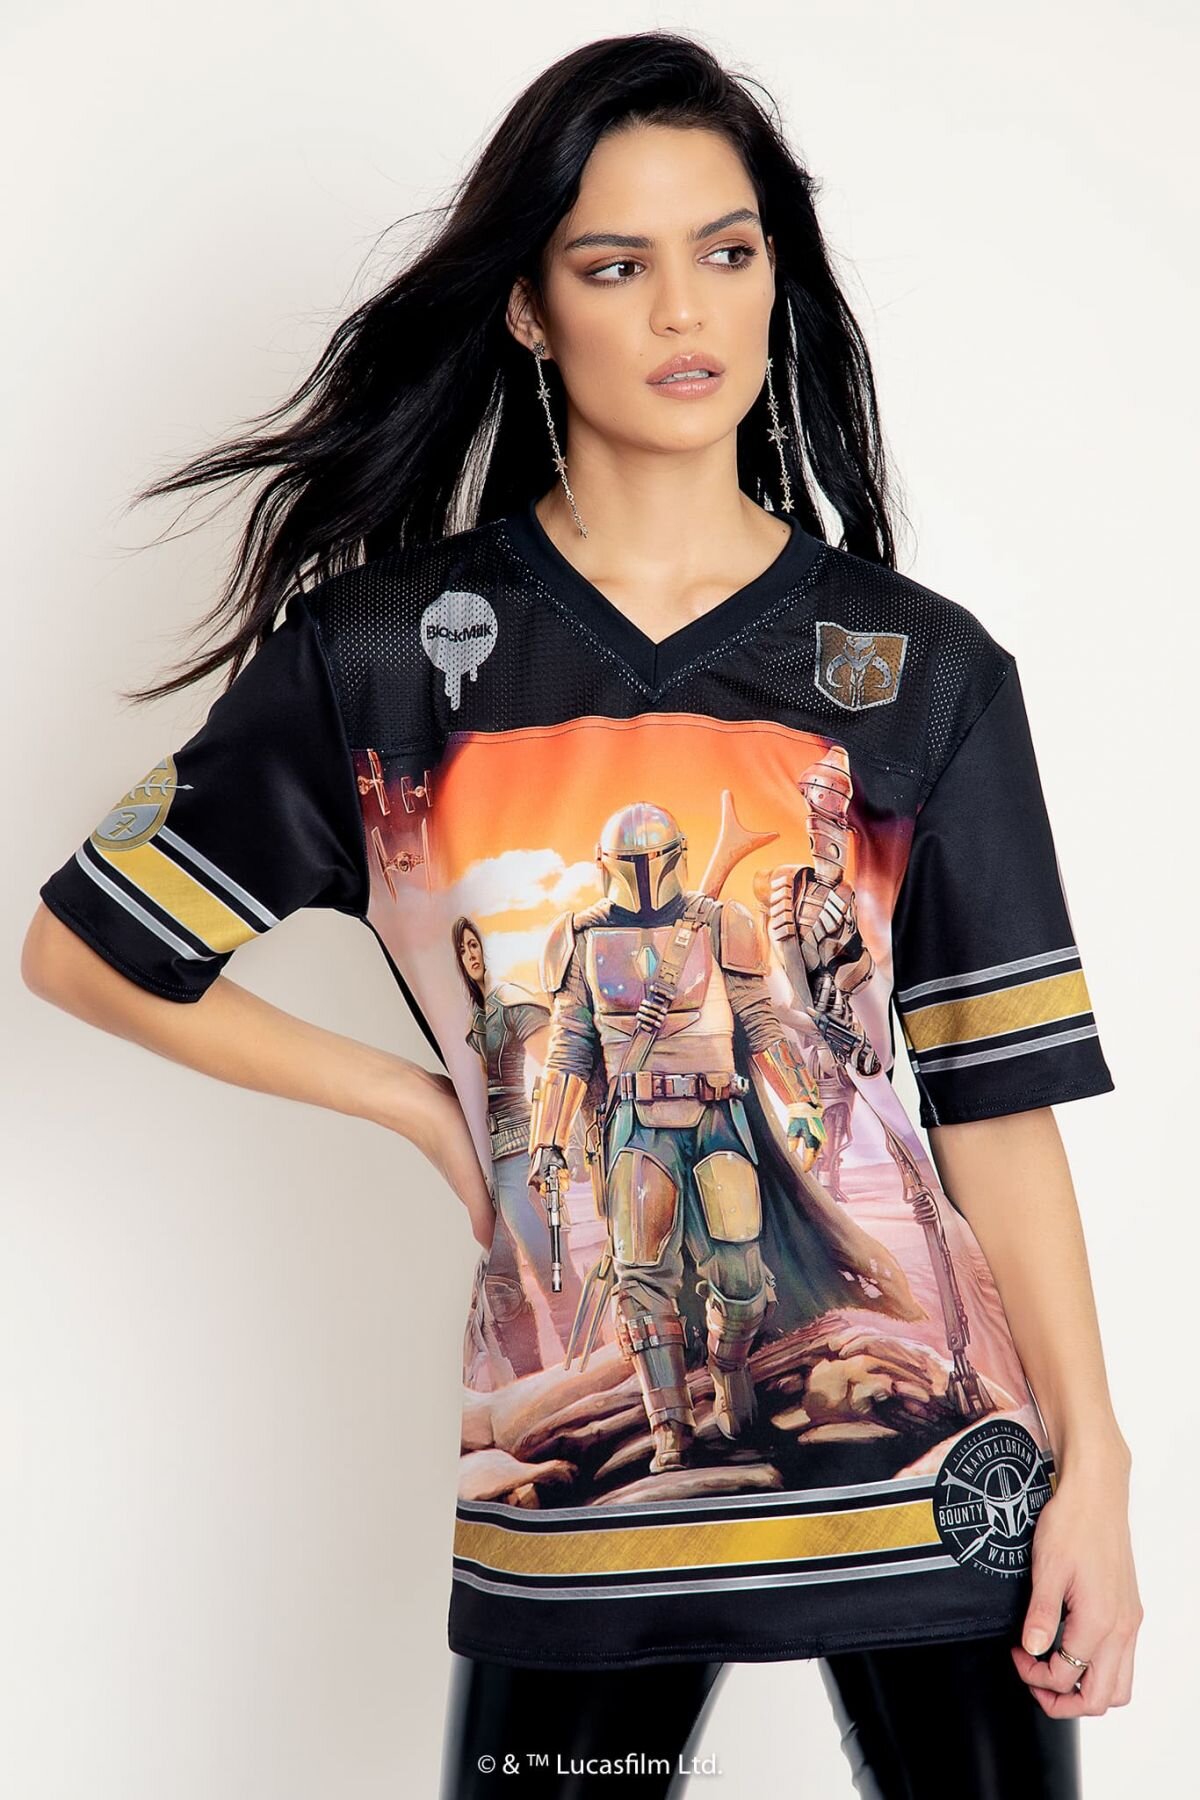 BlackMilk Clothing Just Dropped New Customizable Star Wars